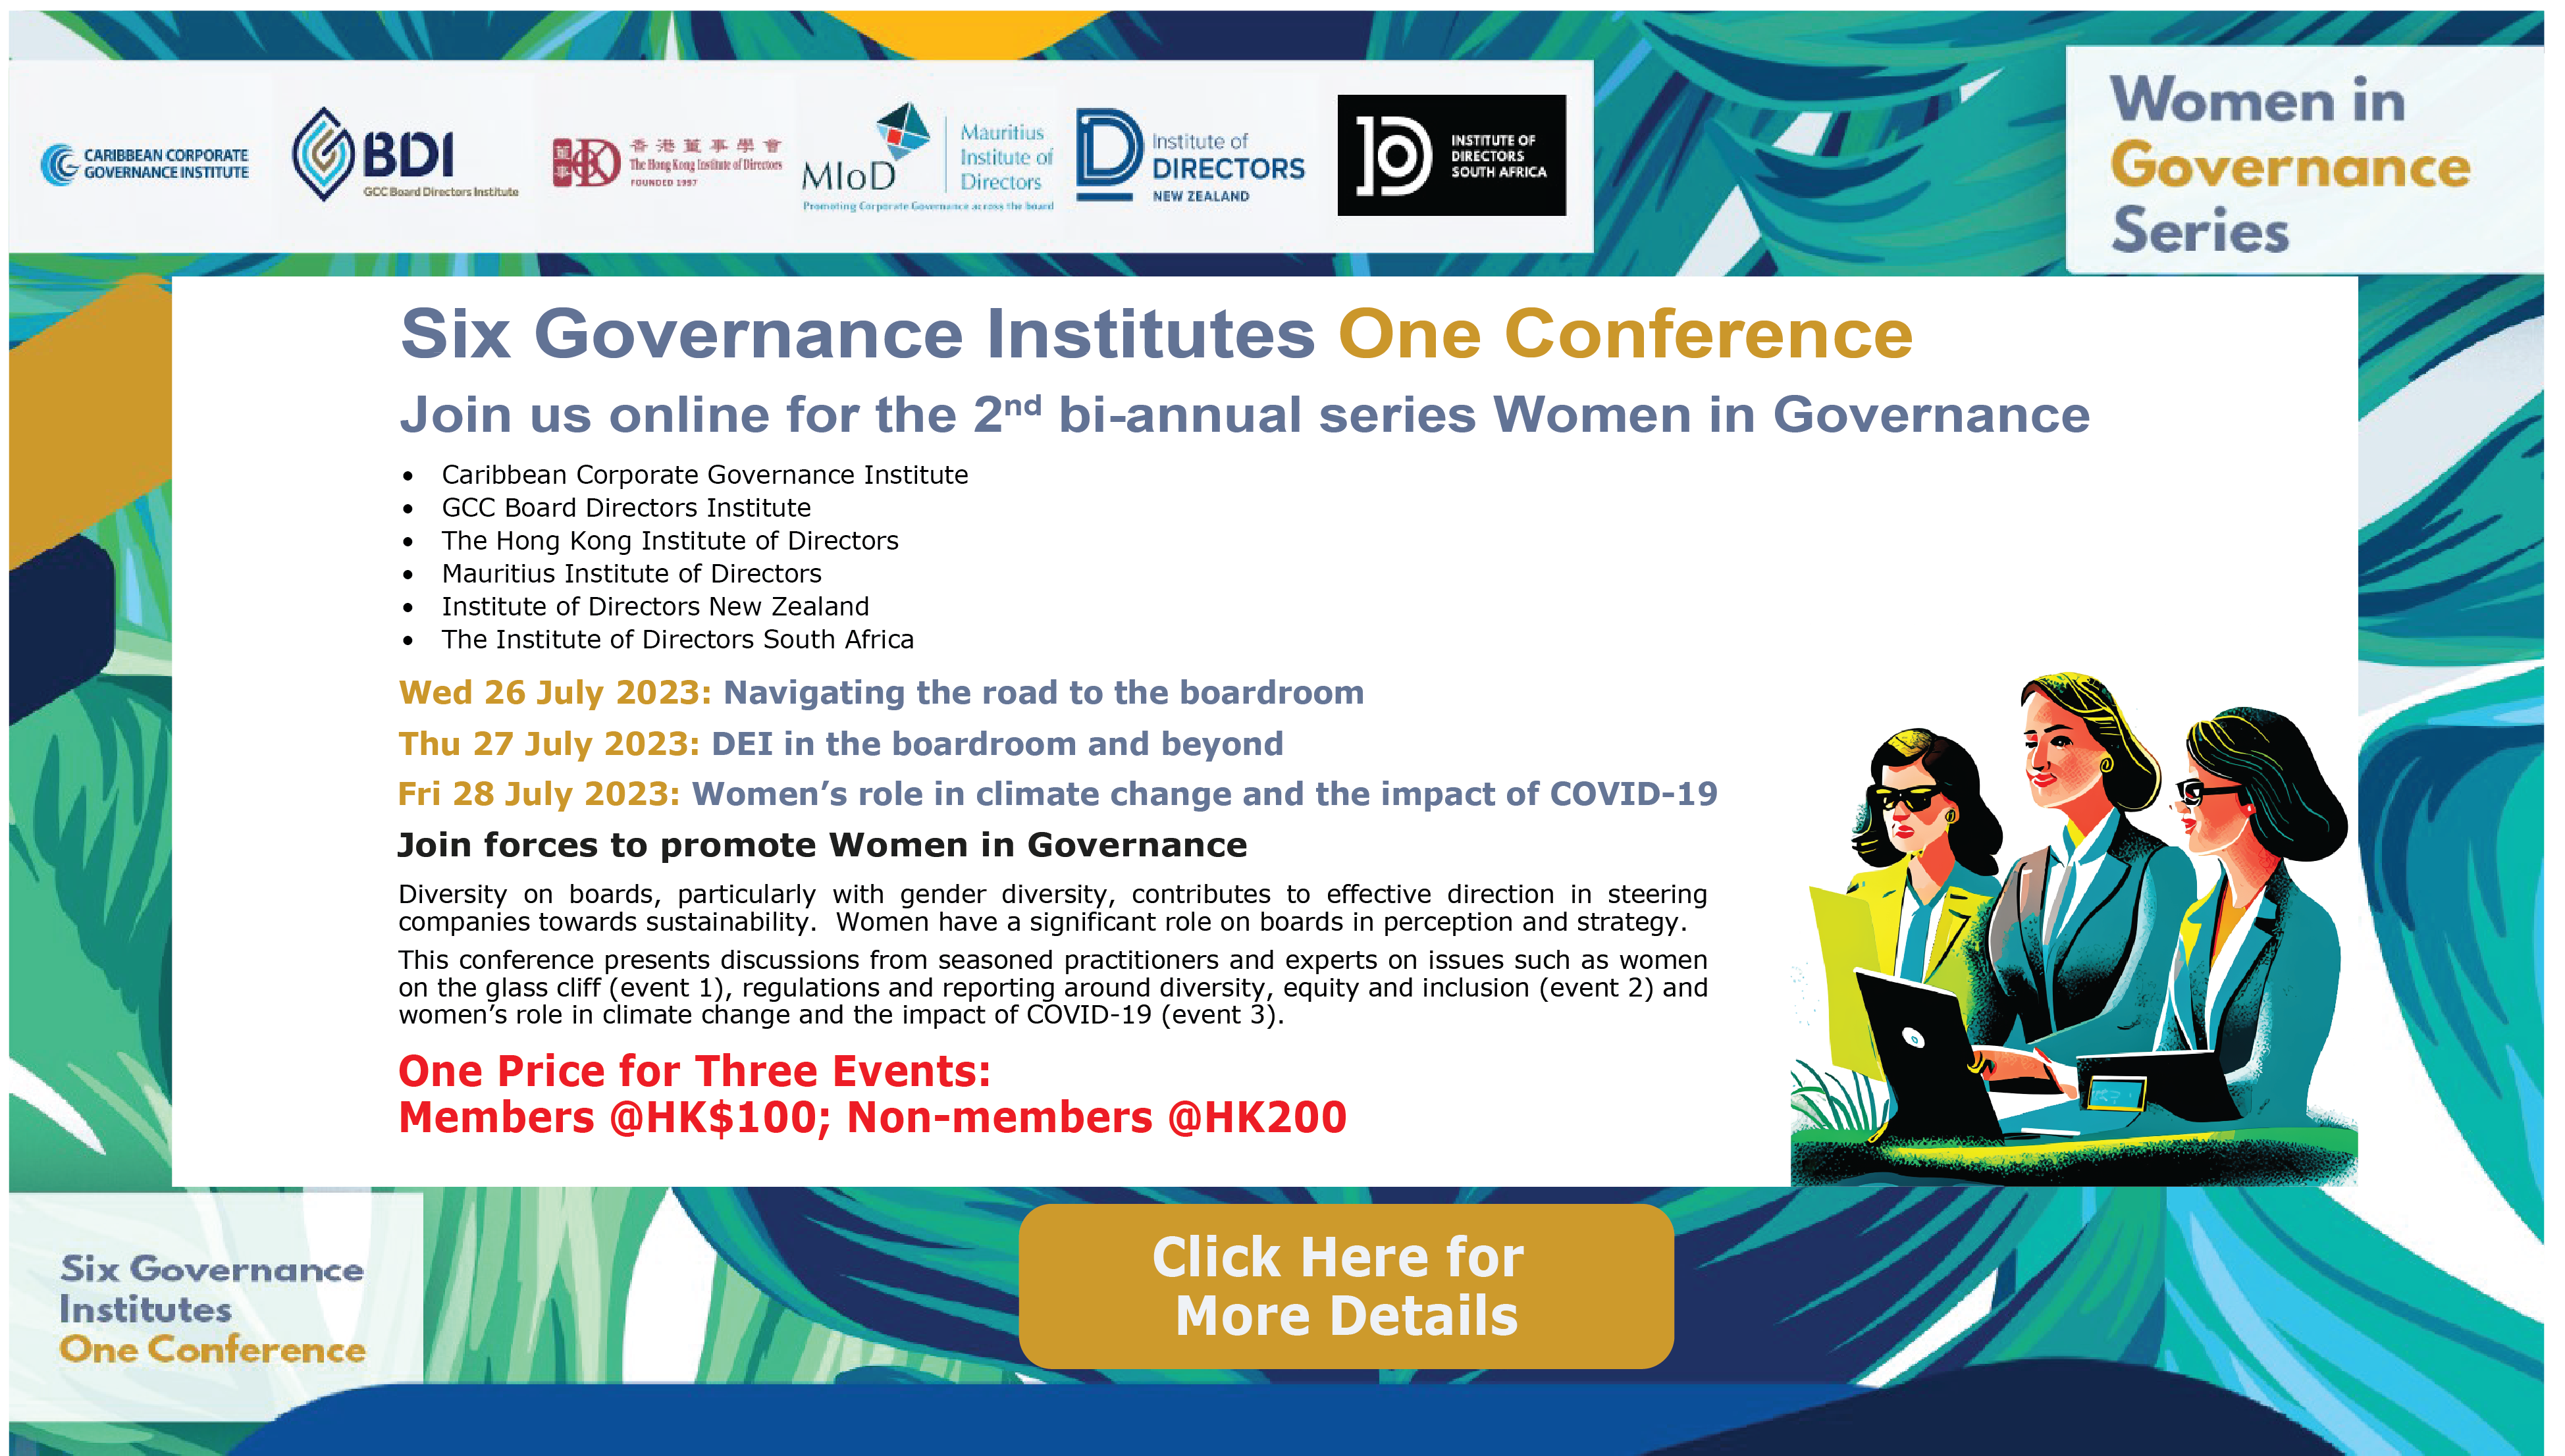 Six Governance Institutes One Conference: Women in Governance